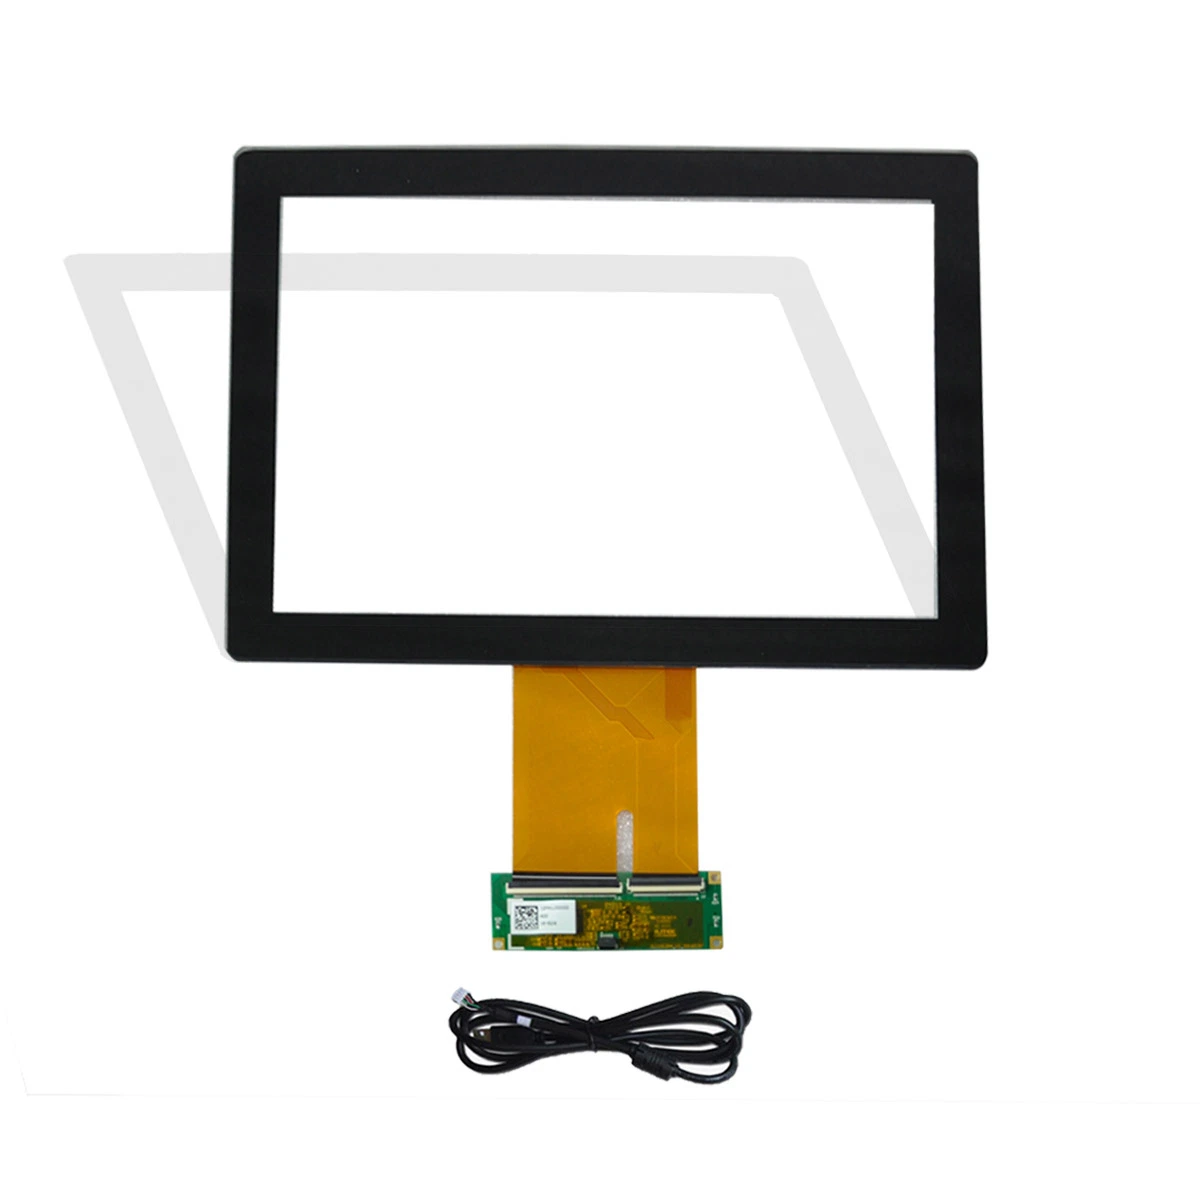 12.1 Inch Pcap Projected Capacitive Touch Technology Capacitive Touch Screen Projected Capacitive Touch Screen